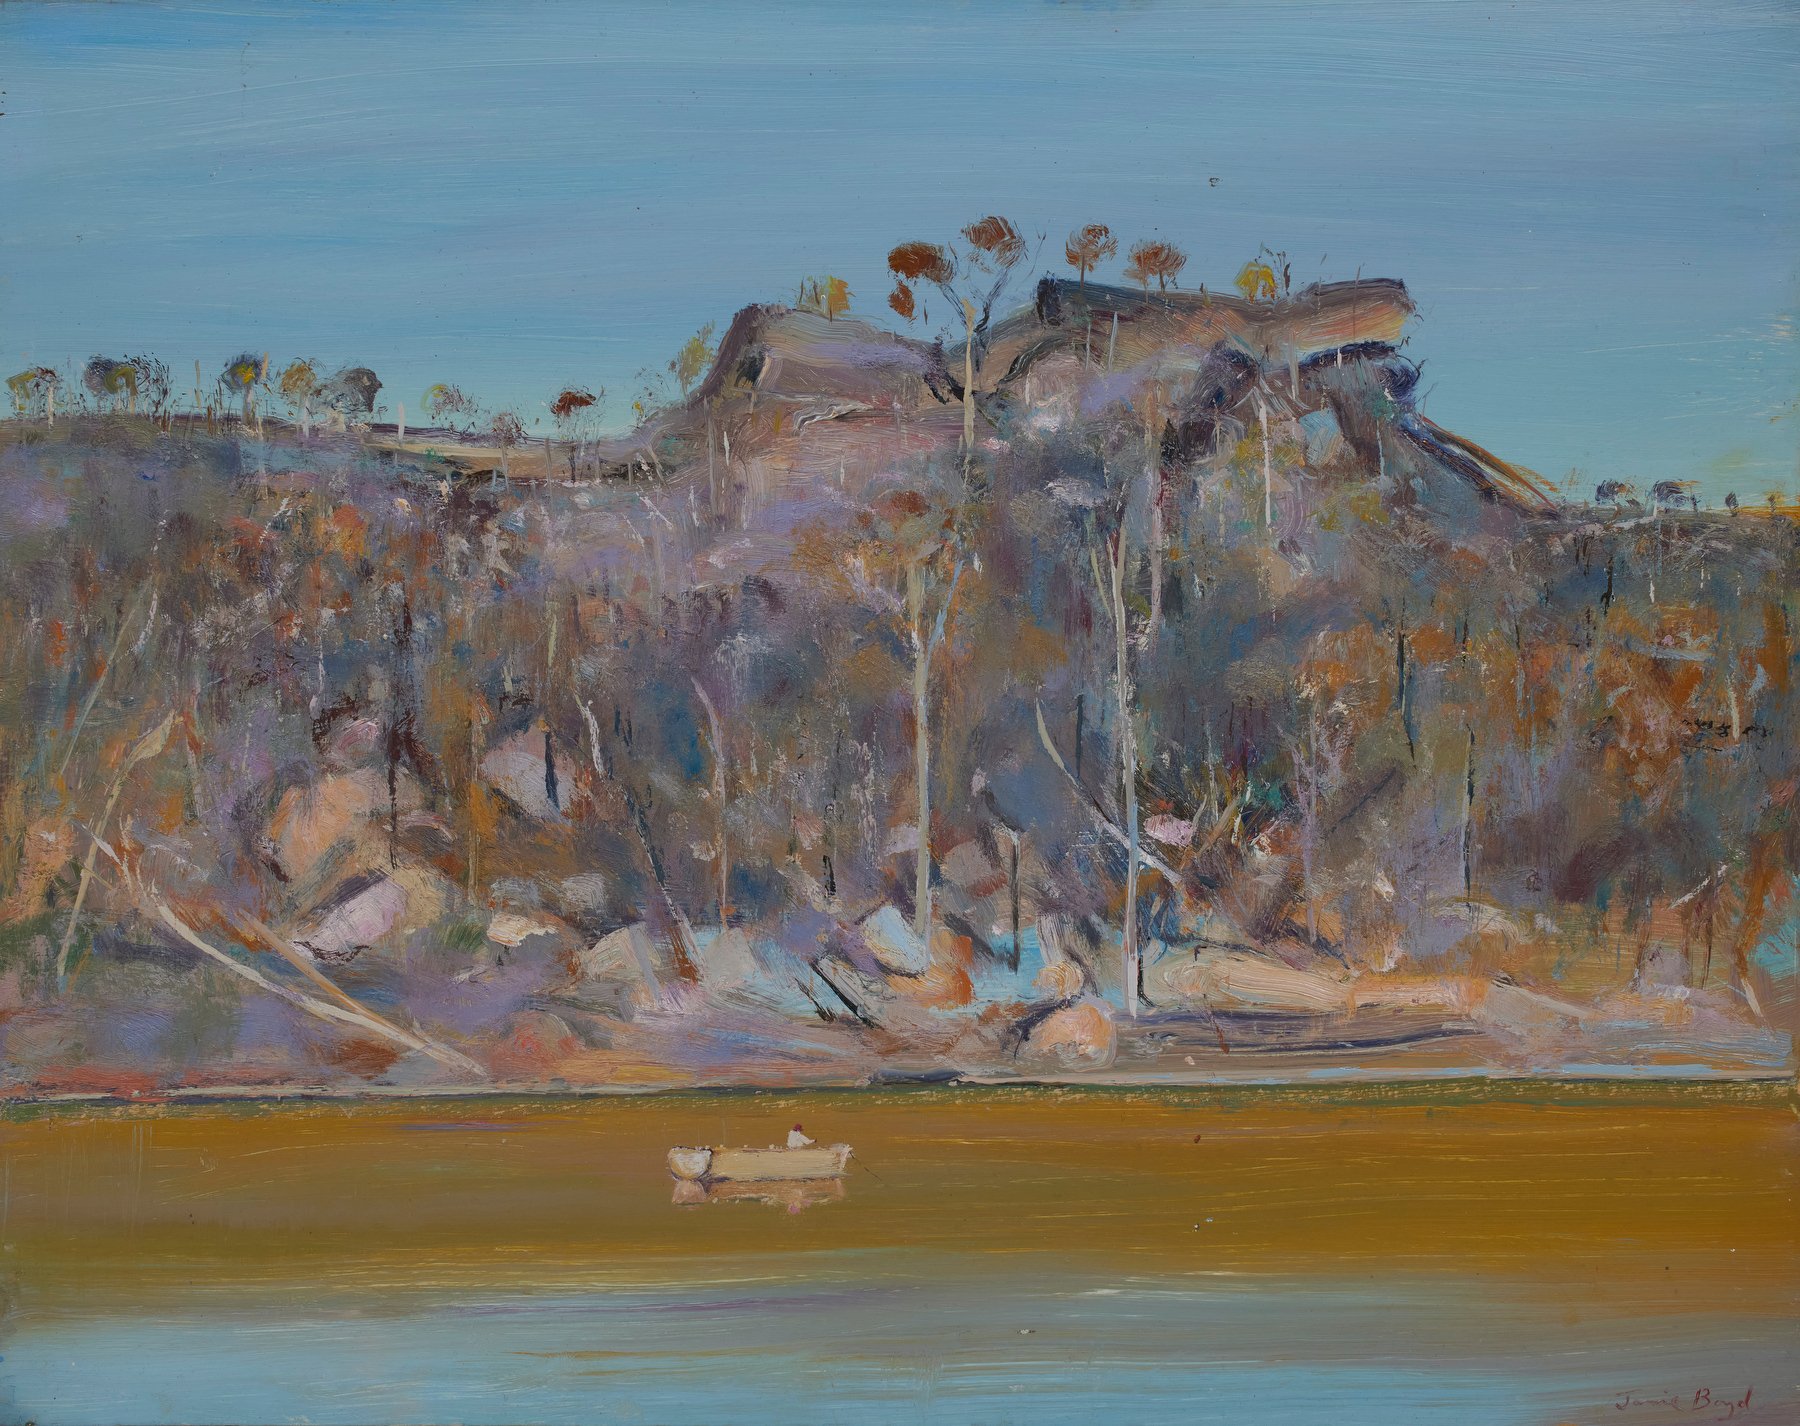 JAMIE BOYD | THE RIVER AND THE OLIVE GROVE